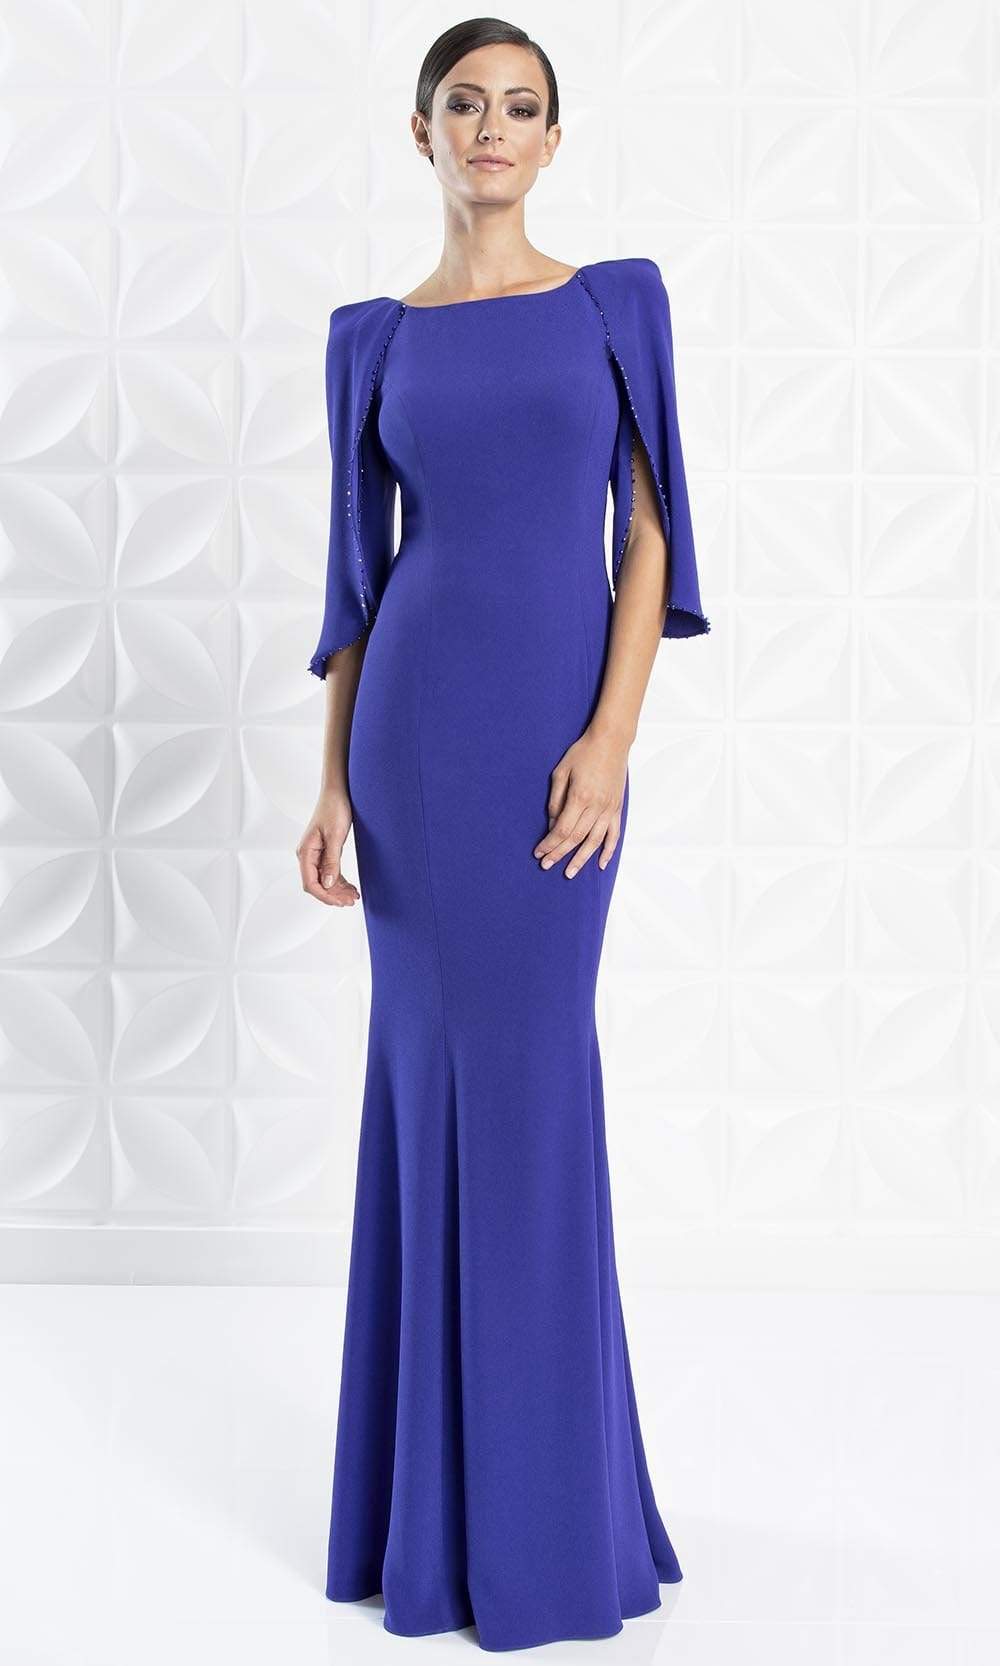 Alexander by Daymor - 1259 Split Caped Sleeve Mermaid Evening Gown
